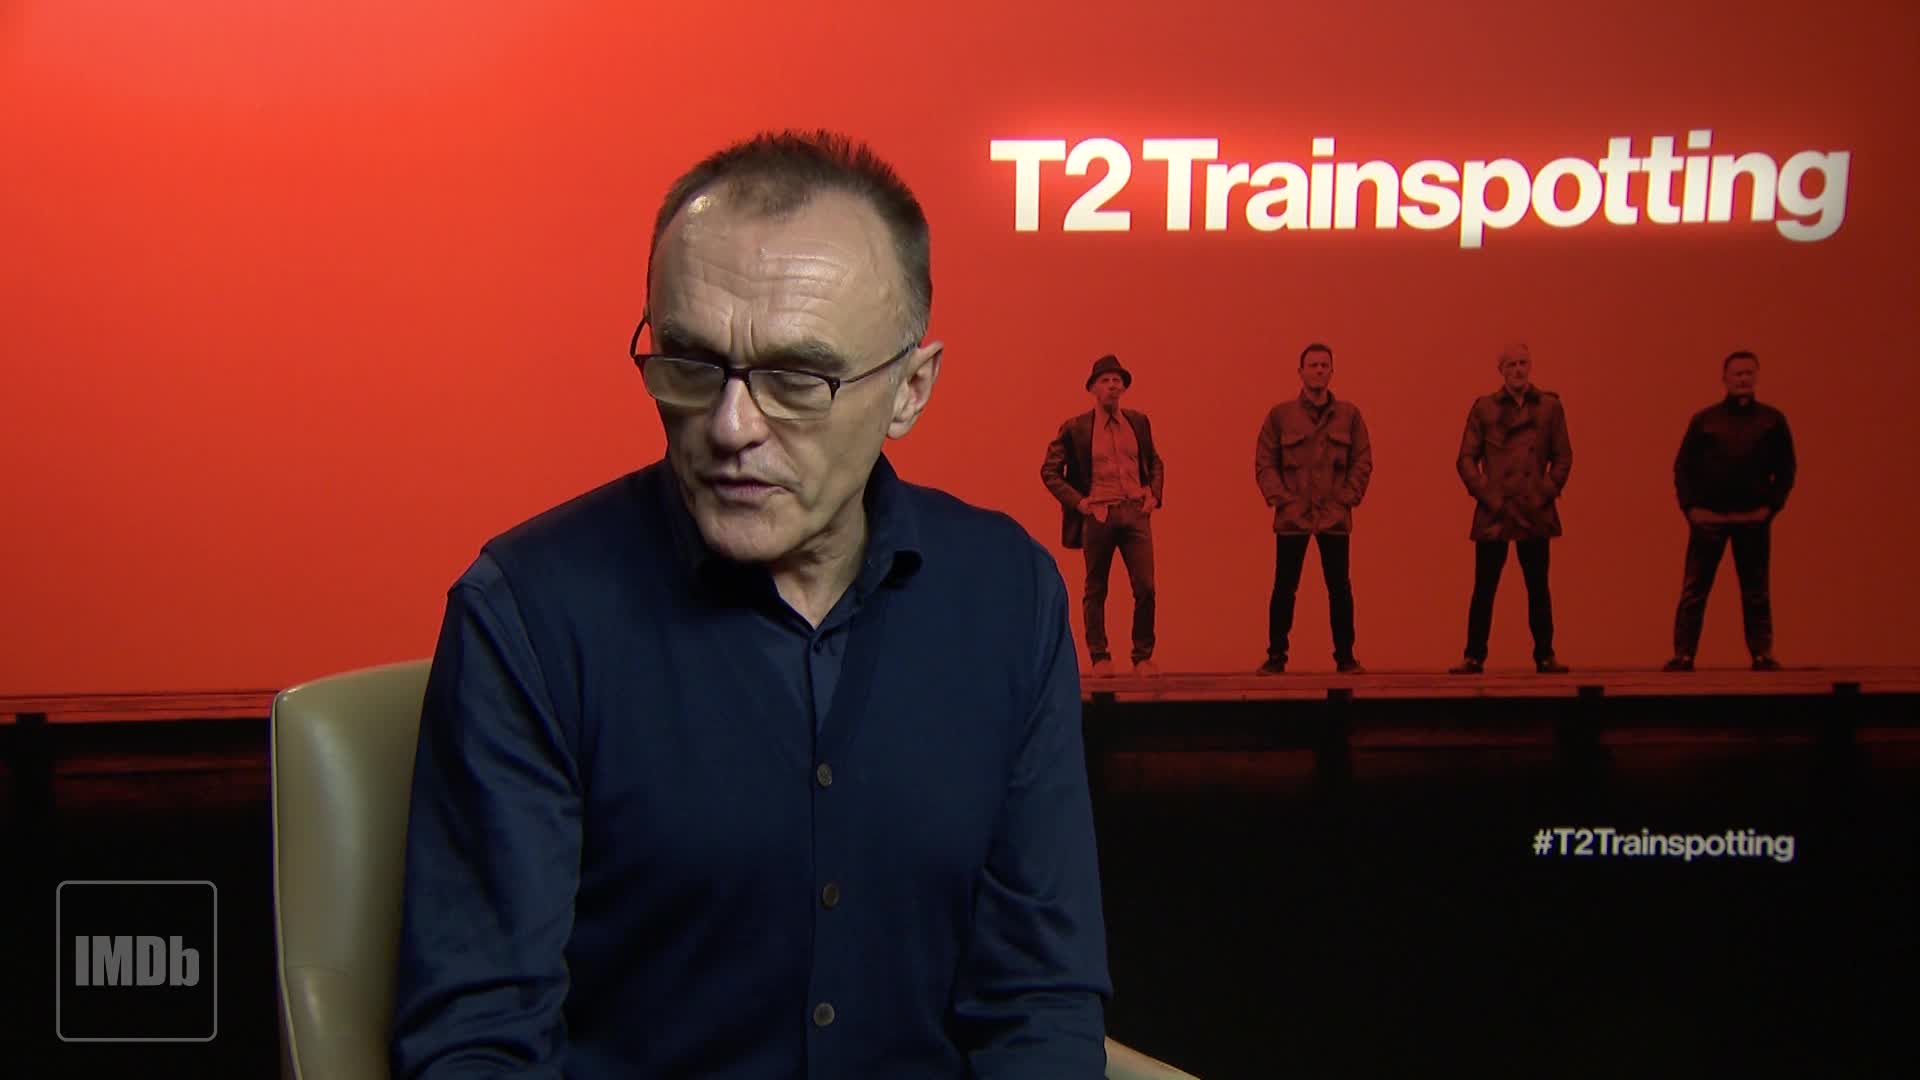 Danny Boyle's First Credit - T2 Trainspotting Big Sleeve Edition , HD Wallpaper & Backgrounds